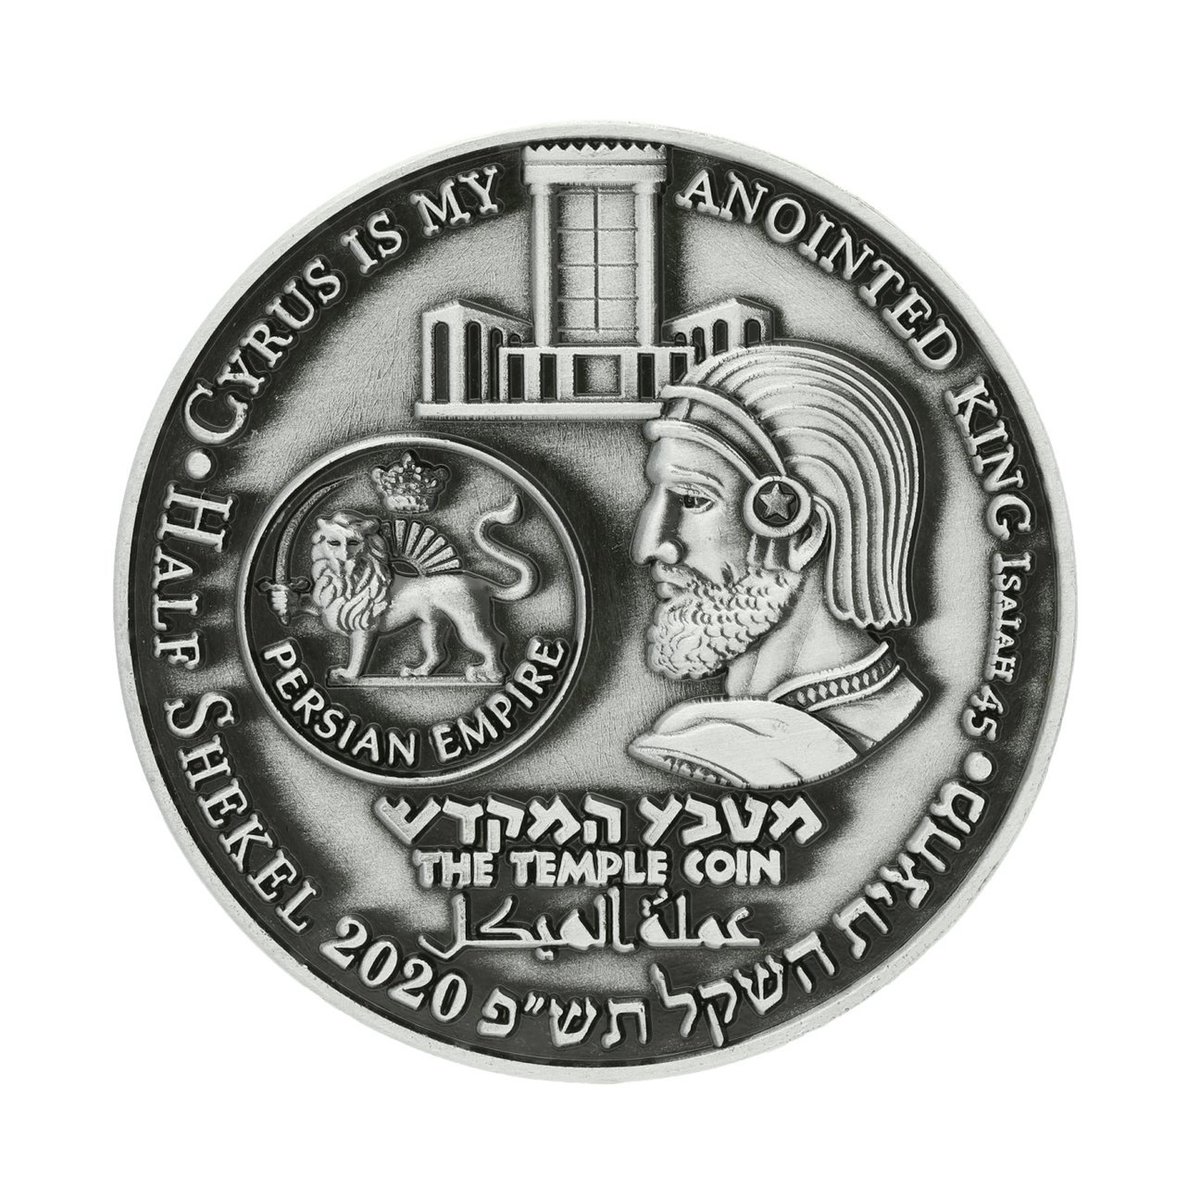 I did some research on the new temple coin.."war of the sons of light against the sons of darkness." I found a connection to the dead sea scrolls. A sect of Jews called the Essene during 2nd temple period whom is believed to of wrote, copied or preserved the dead sea scrolls.